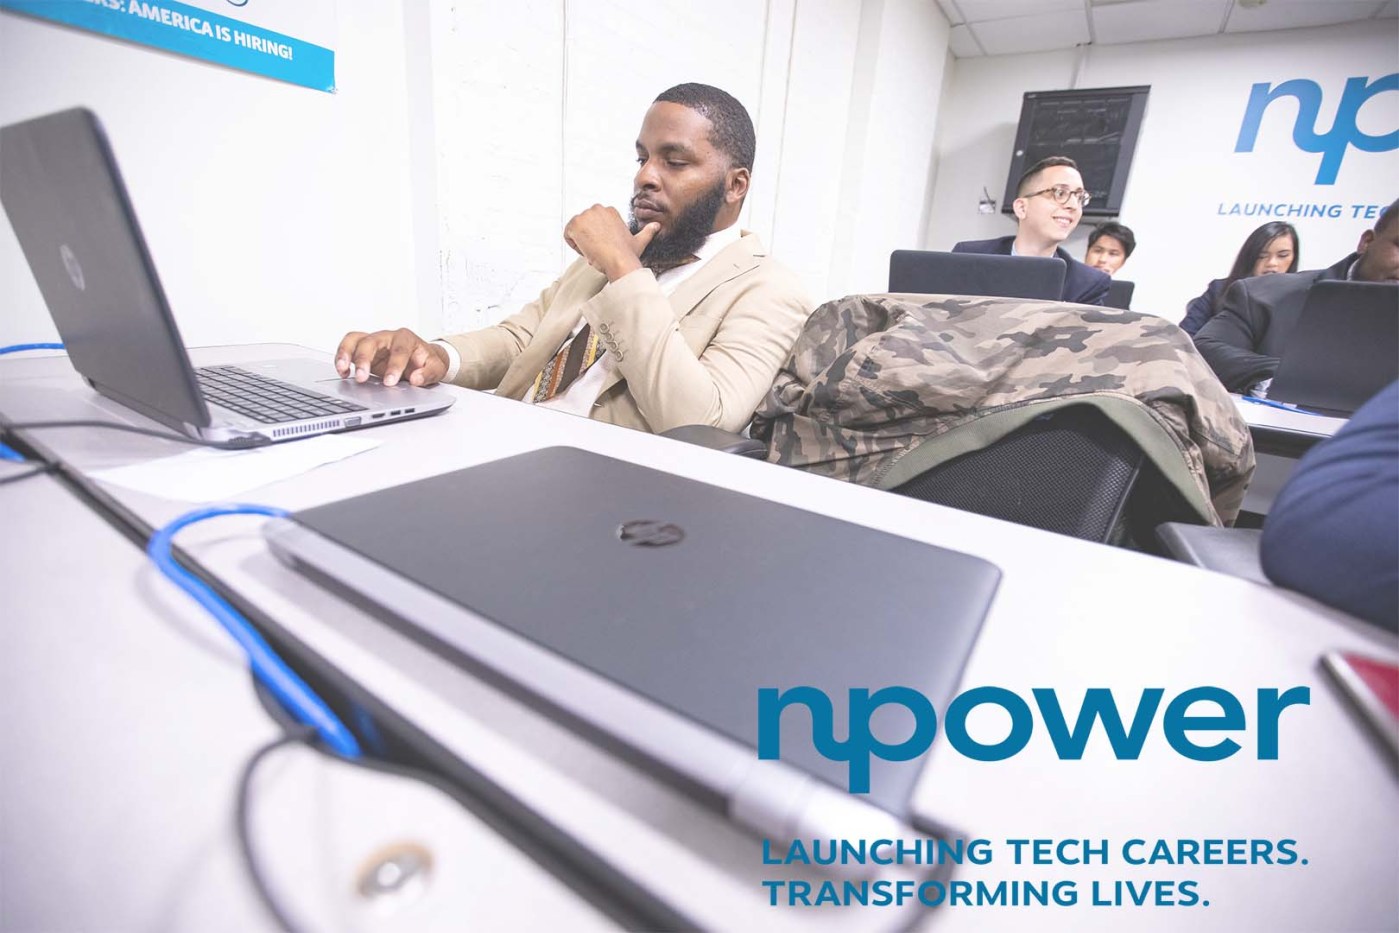 Free training programs offer Veterans, military spouses path to tech careers